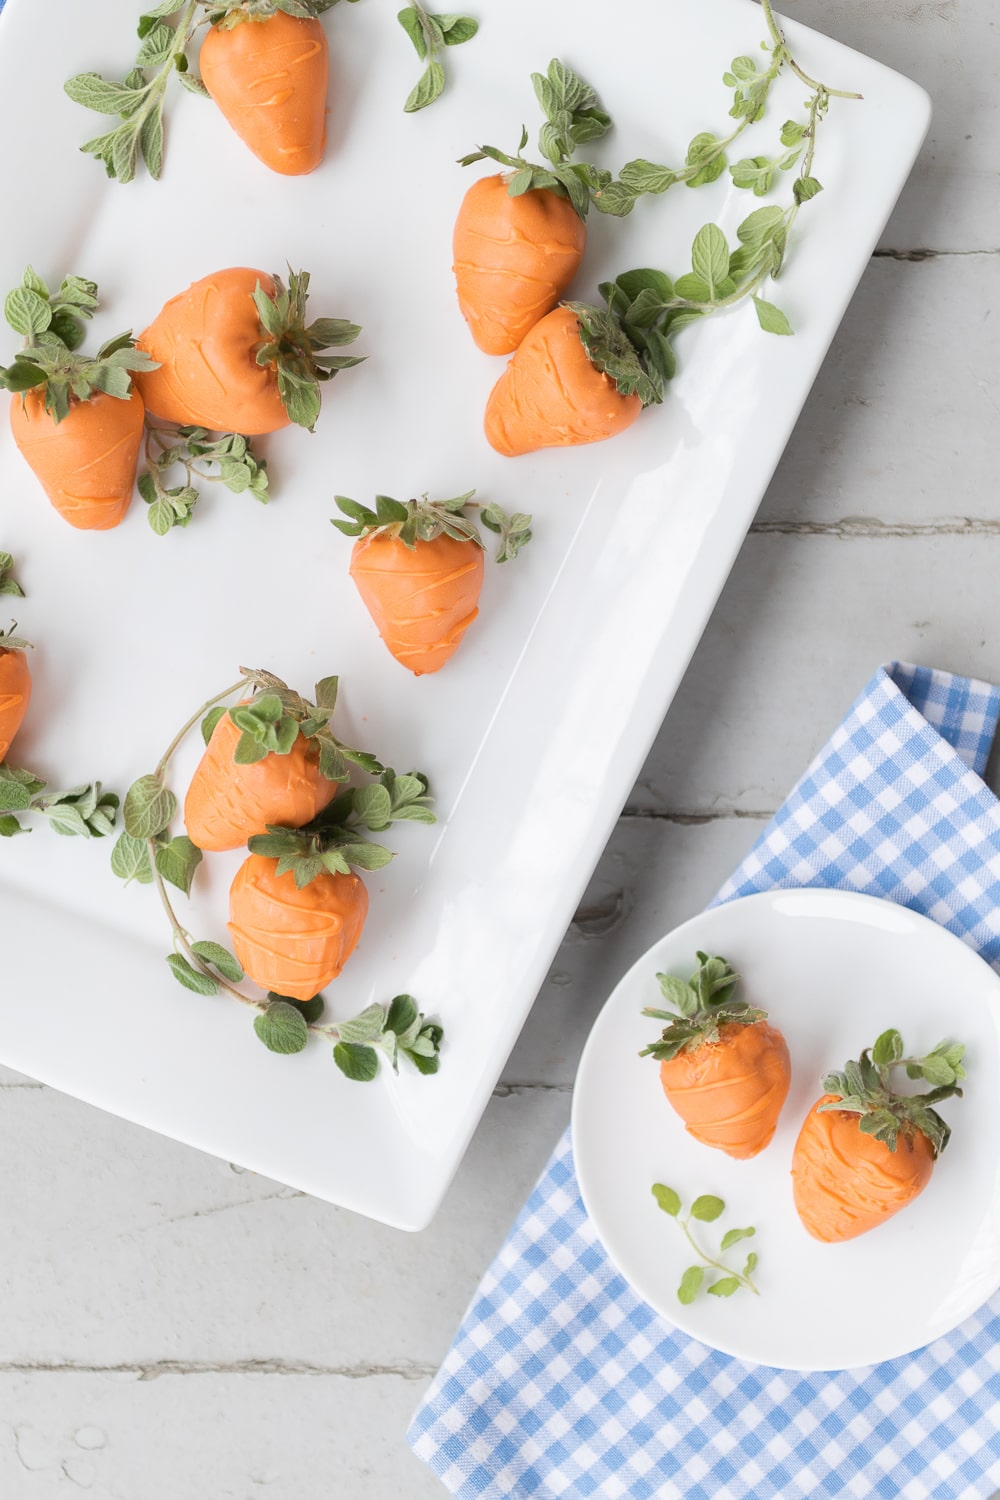 Blogger Stephanie Ziajka shows how to make chocolate covered strawberries like carrots on Diary of a Debutante